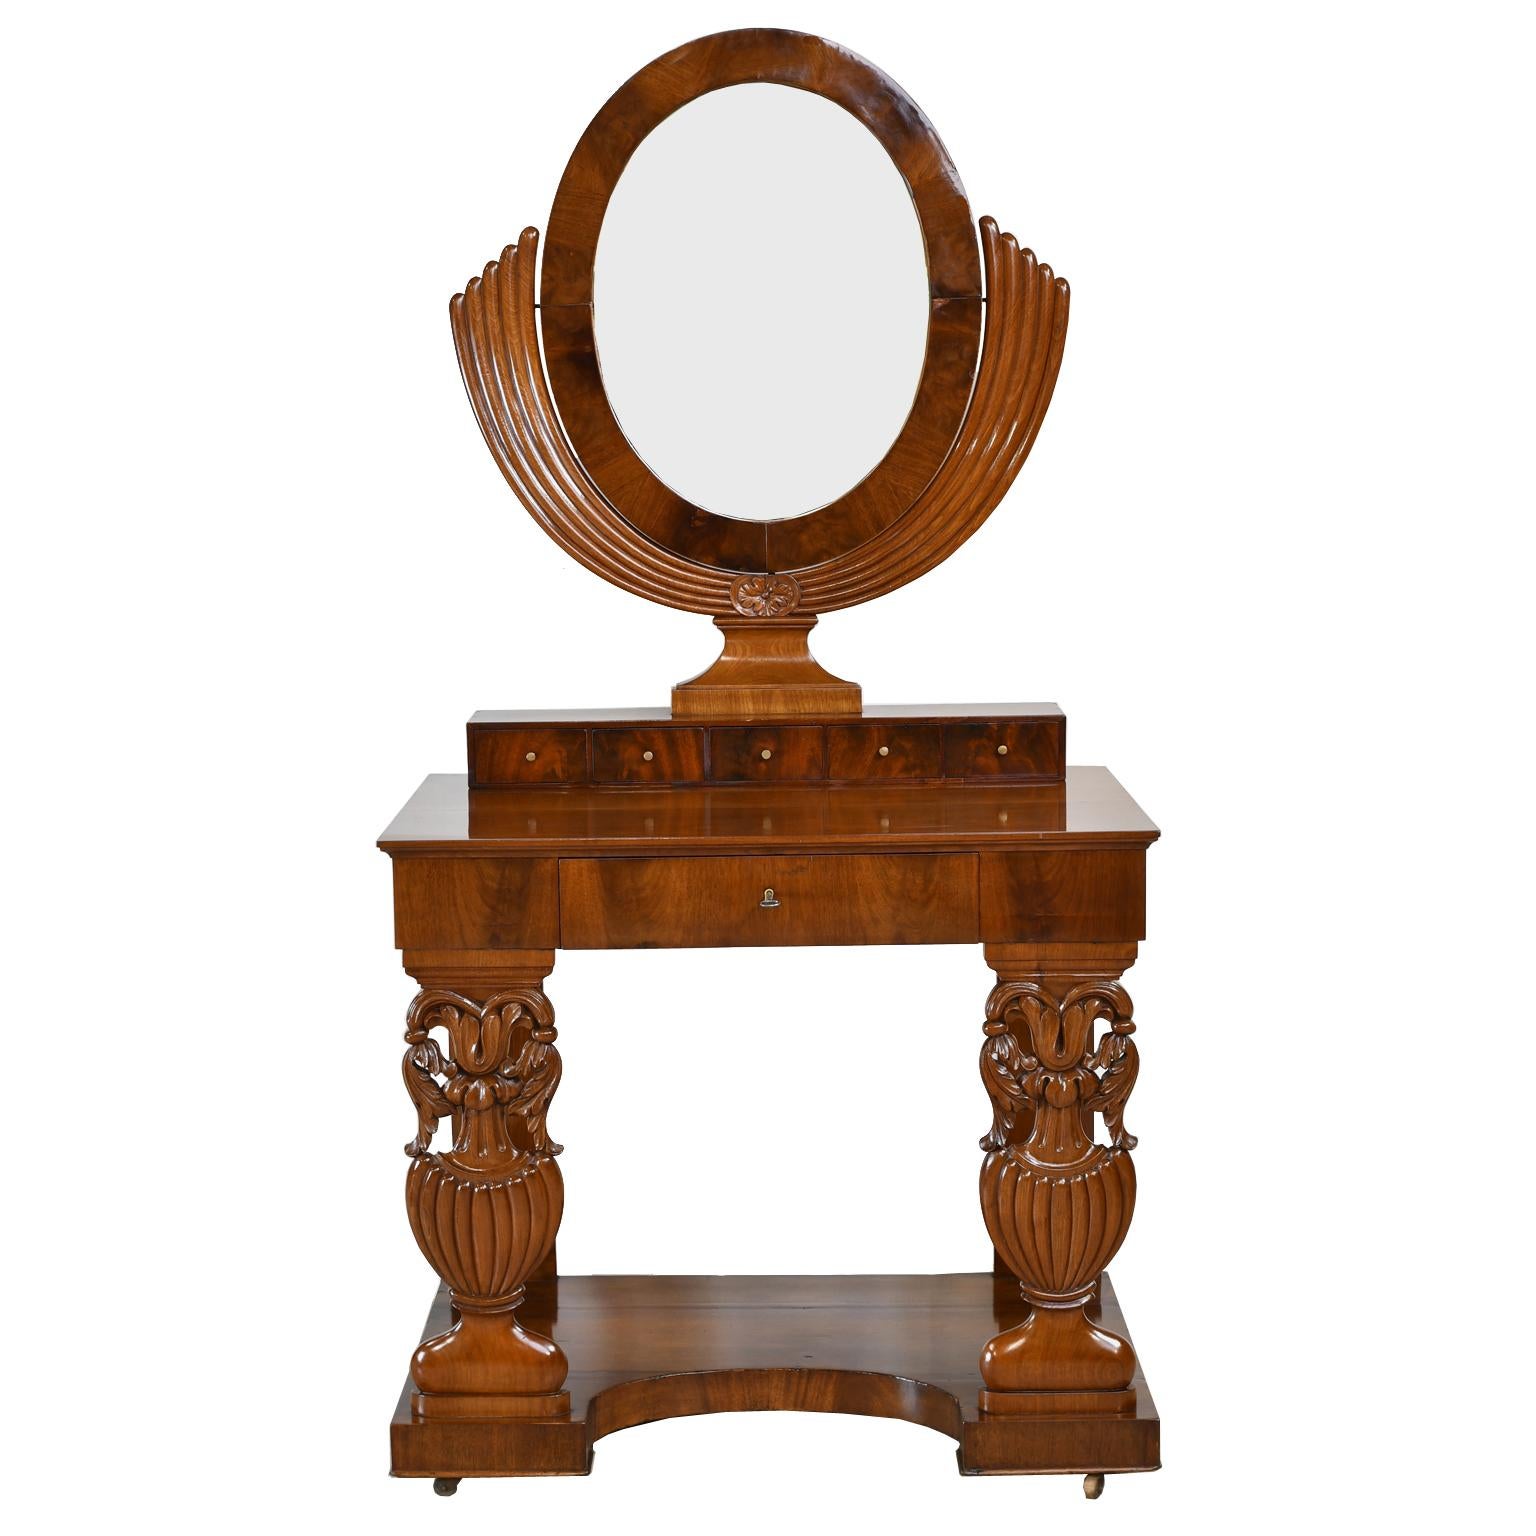 An exquisite early Biedermeier dressing table or console in fine West Indies mahogany, likely from Northern Germany. Features an oval mirror supported on ribbed 